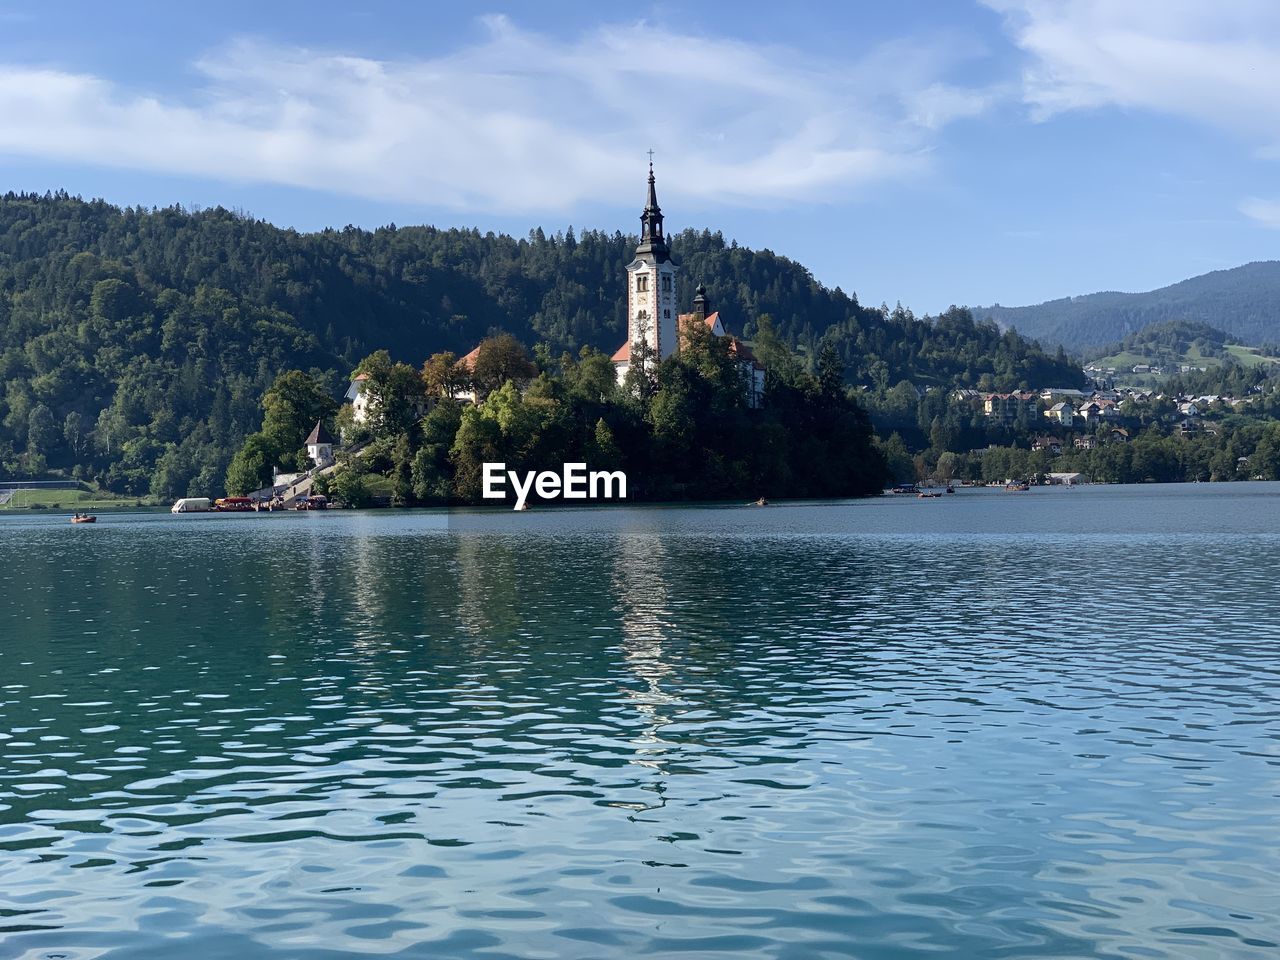 Church of the assumtion island seen in a perfect summer day on lake bled, slovenia